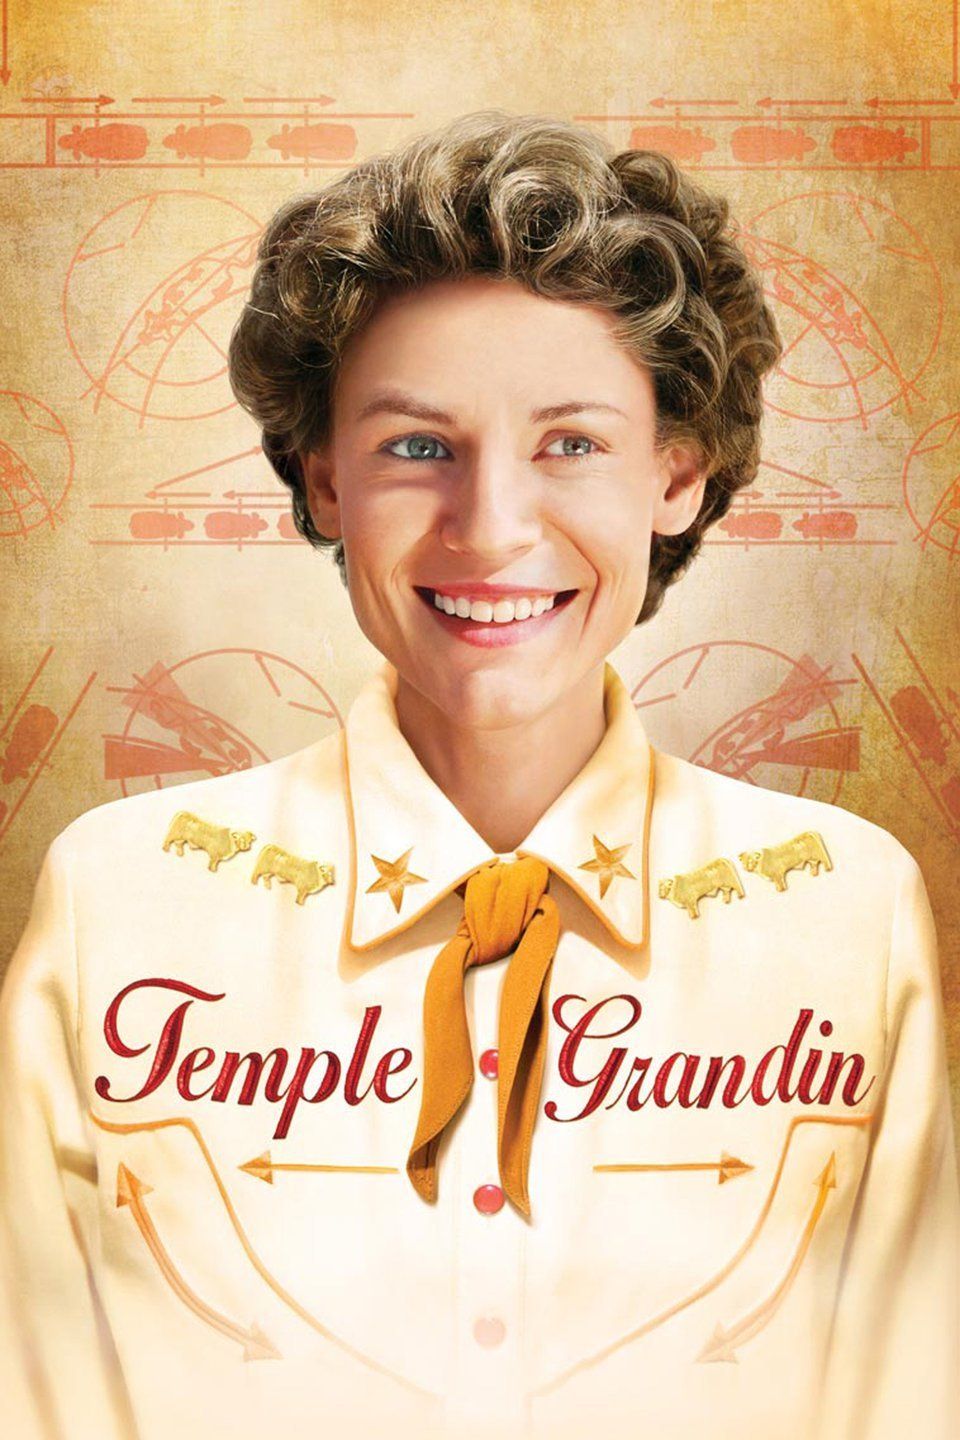 Temple Grandin - the movie (on HBO)